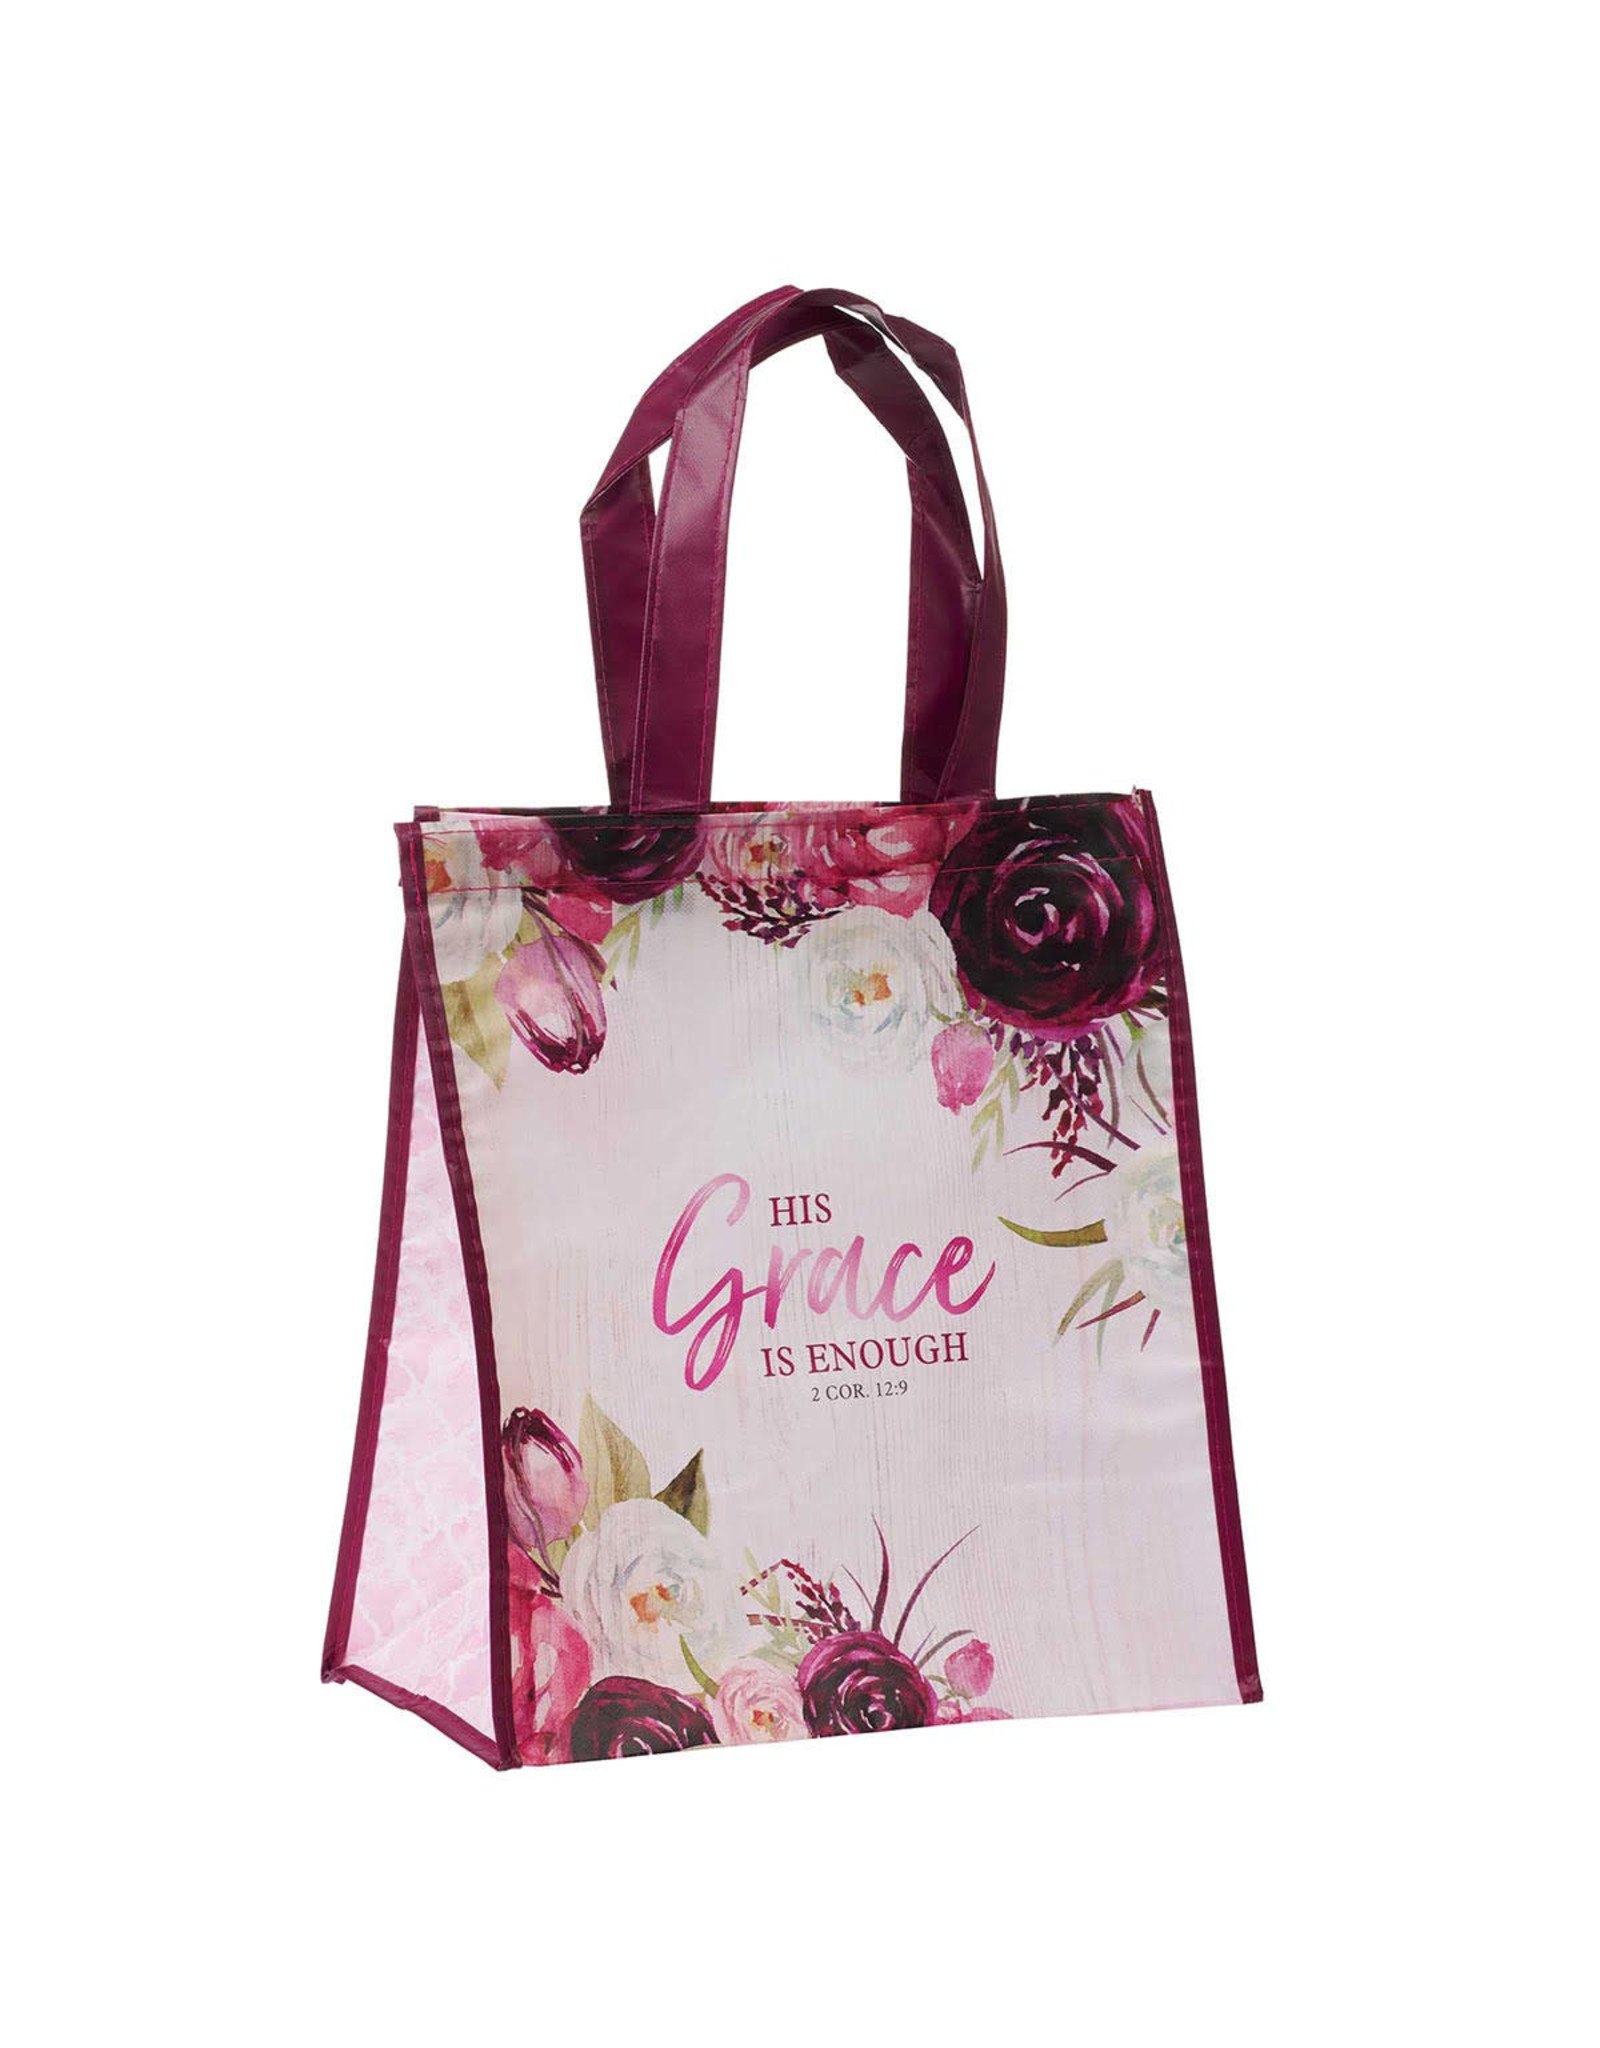 Christian Art Gifts Reusable Shopping Tote Bag - His Grace is Enough, Plum Pink Floral